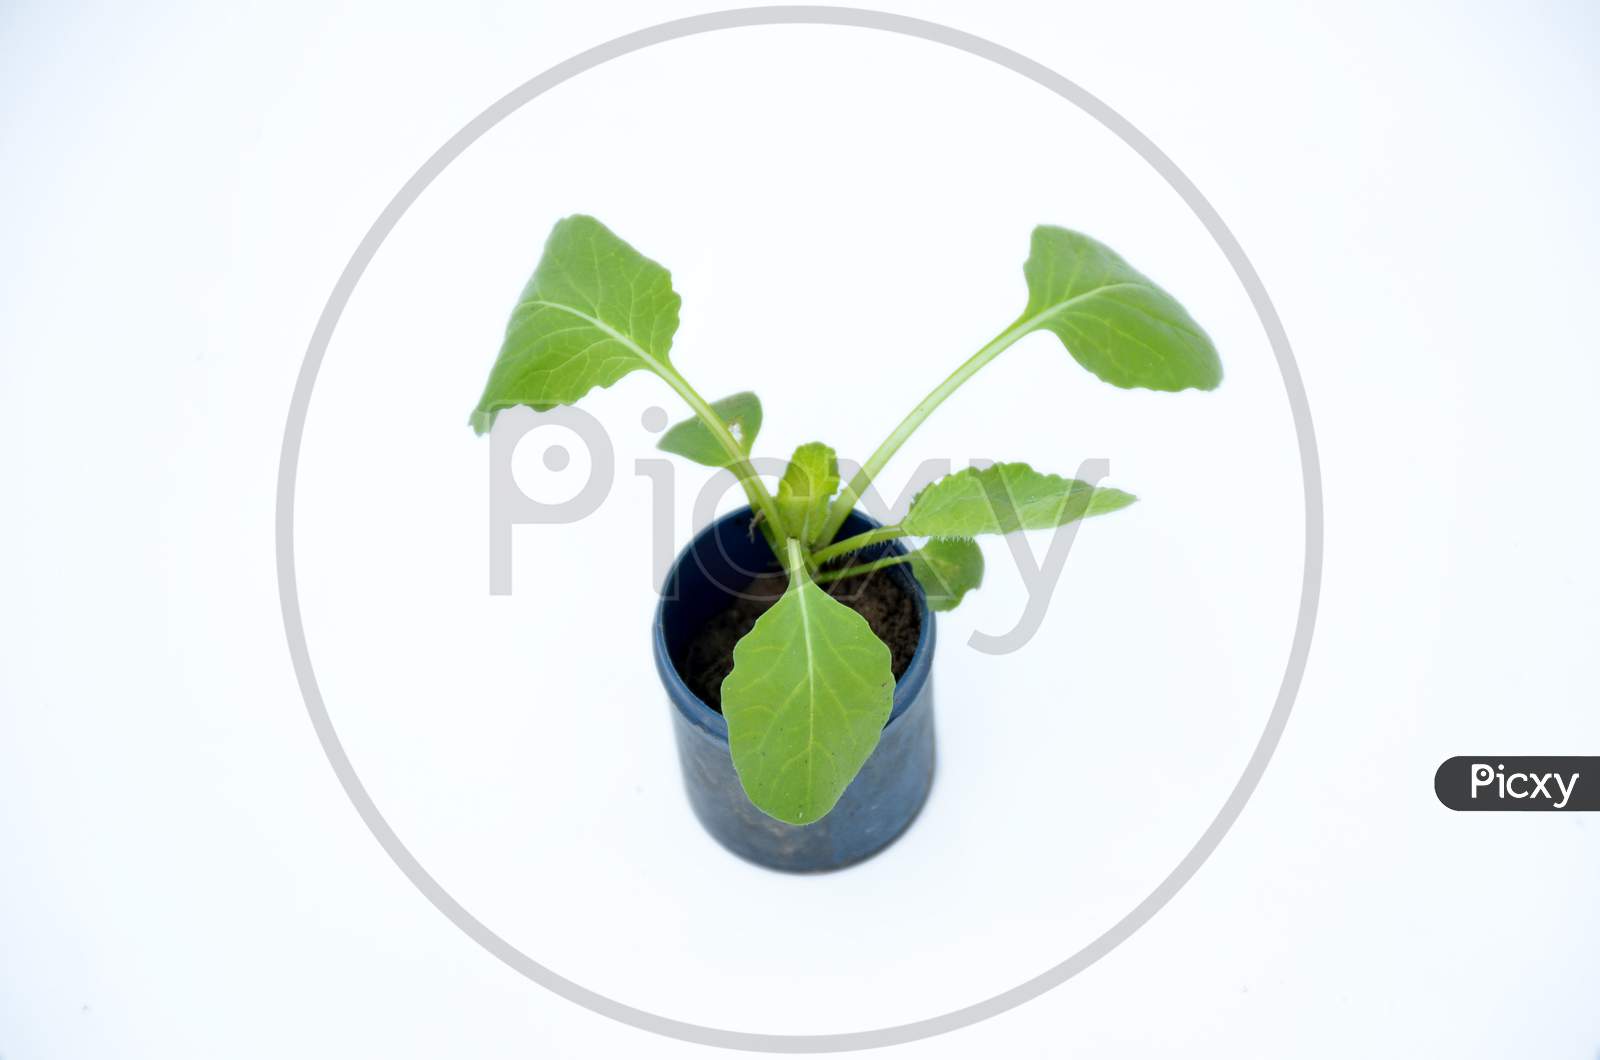 The Ripe Green Spinach Seedlings In Plastic Pot Isolated On White Background.